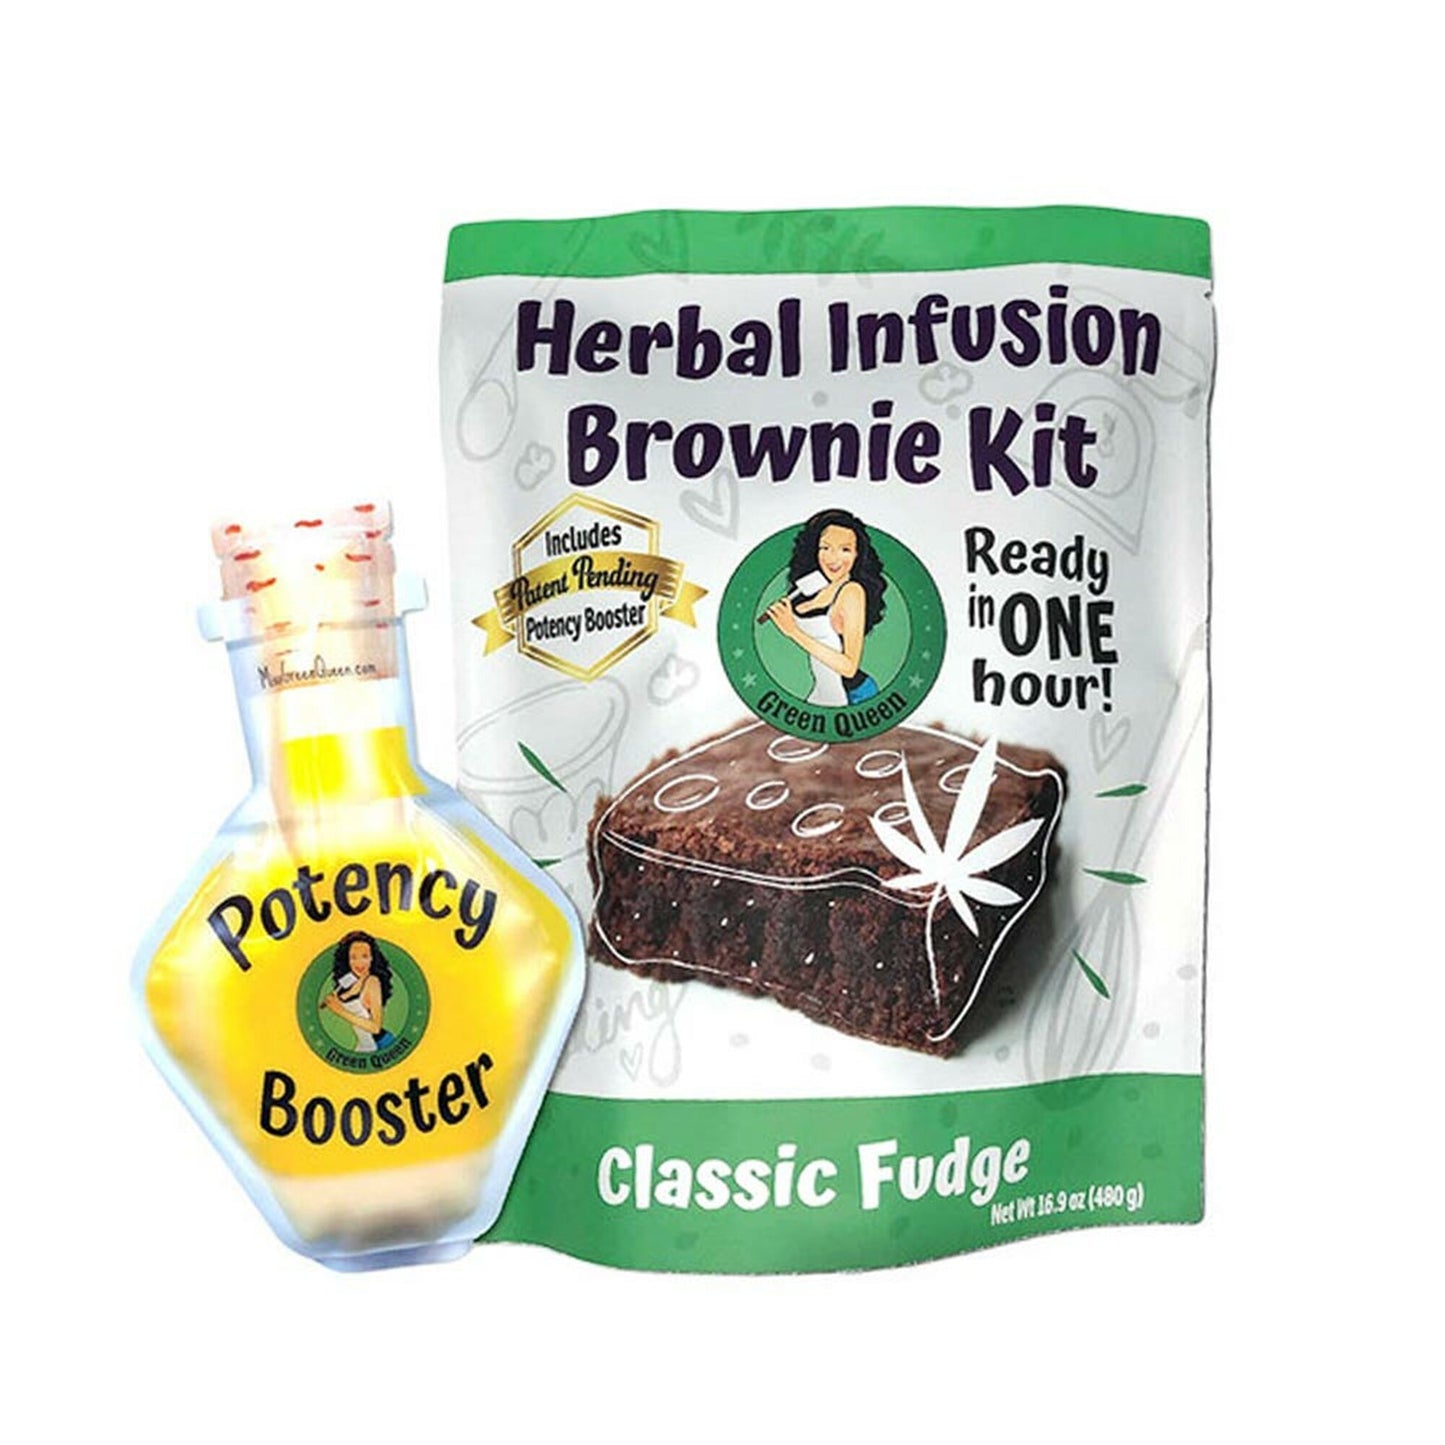 GREEN QUEEN HERBAL INFUSION BROWNIE KIT - CLASSIC FUDGE